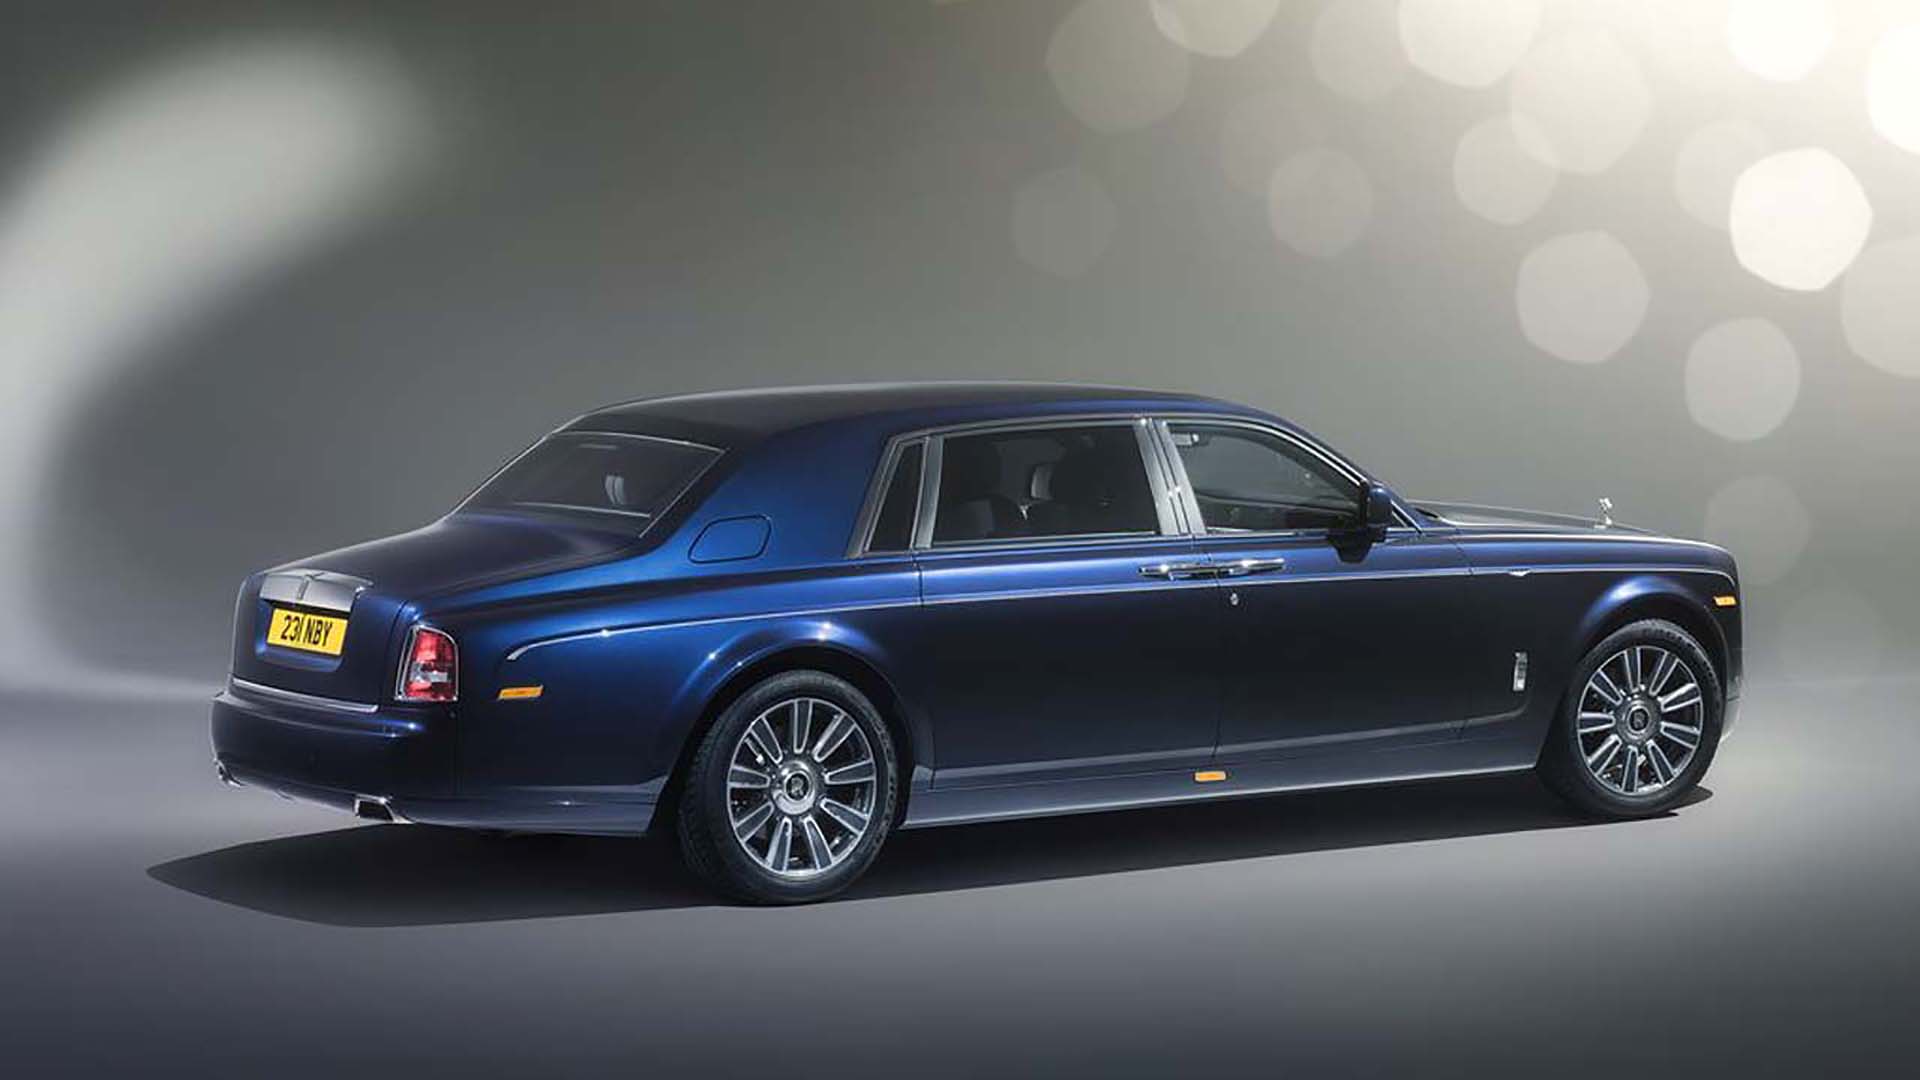 Rolls Royce Phantom Extended Wheelbase Luxury Rear Environment by ADP Special Projects